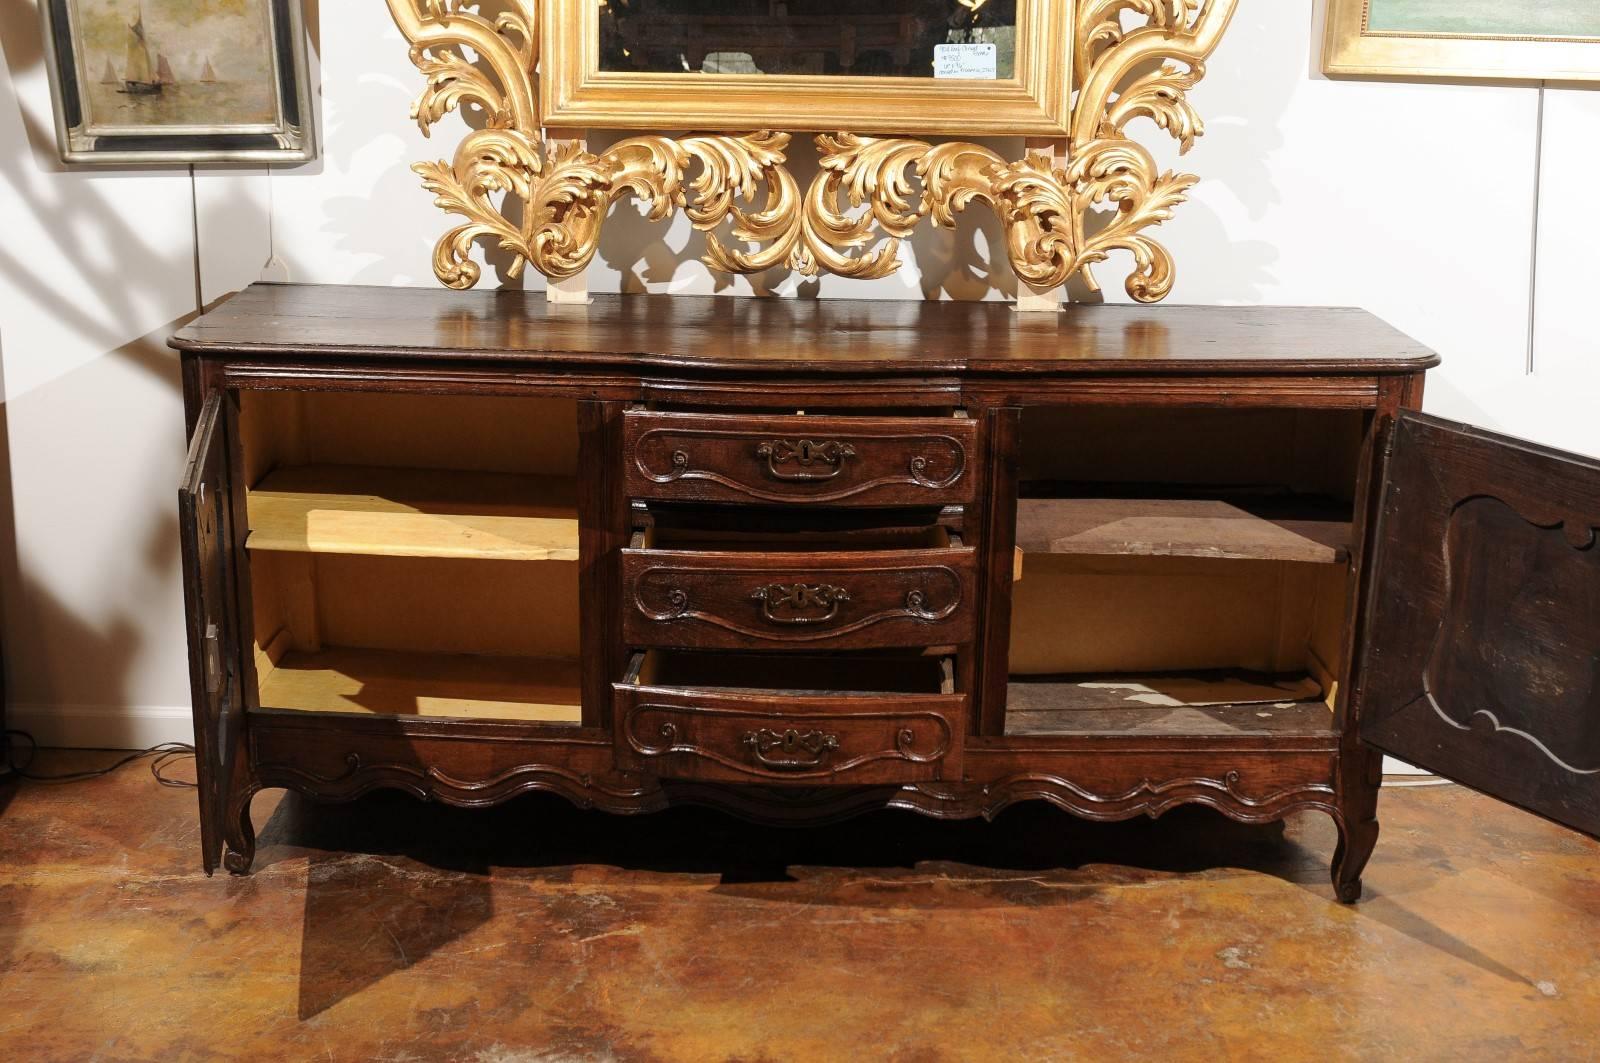 French Louis XV Style Oak Sideboard with Scrolled Motifs, Late 18th Century 4